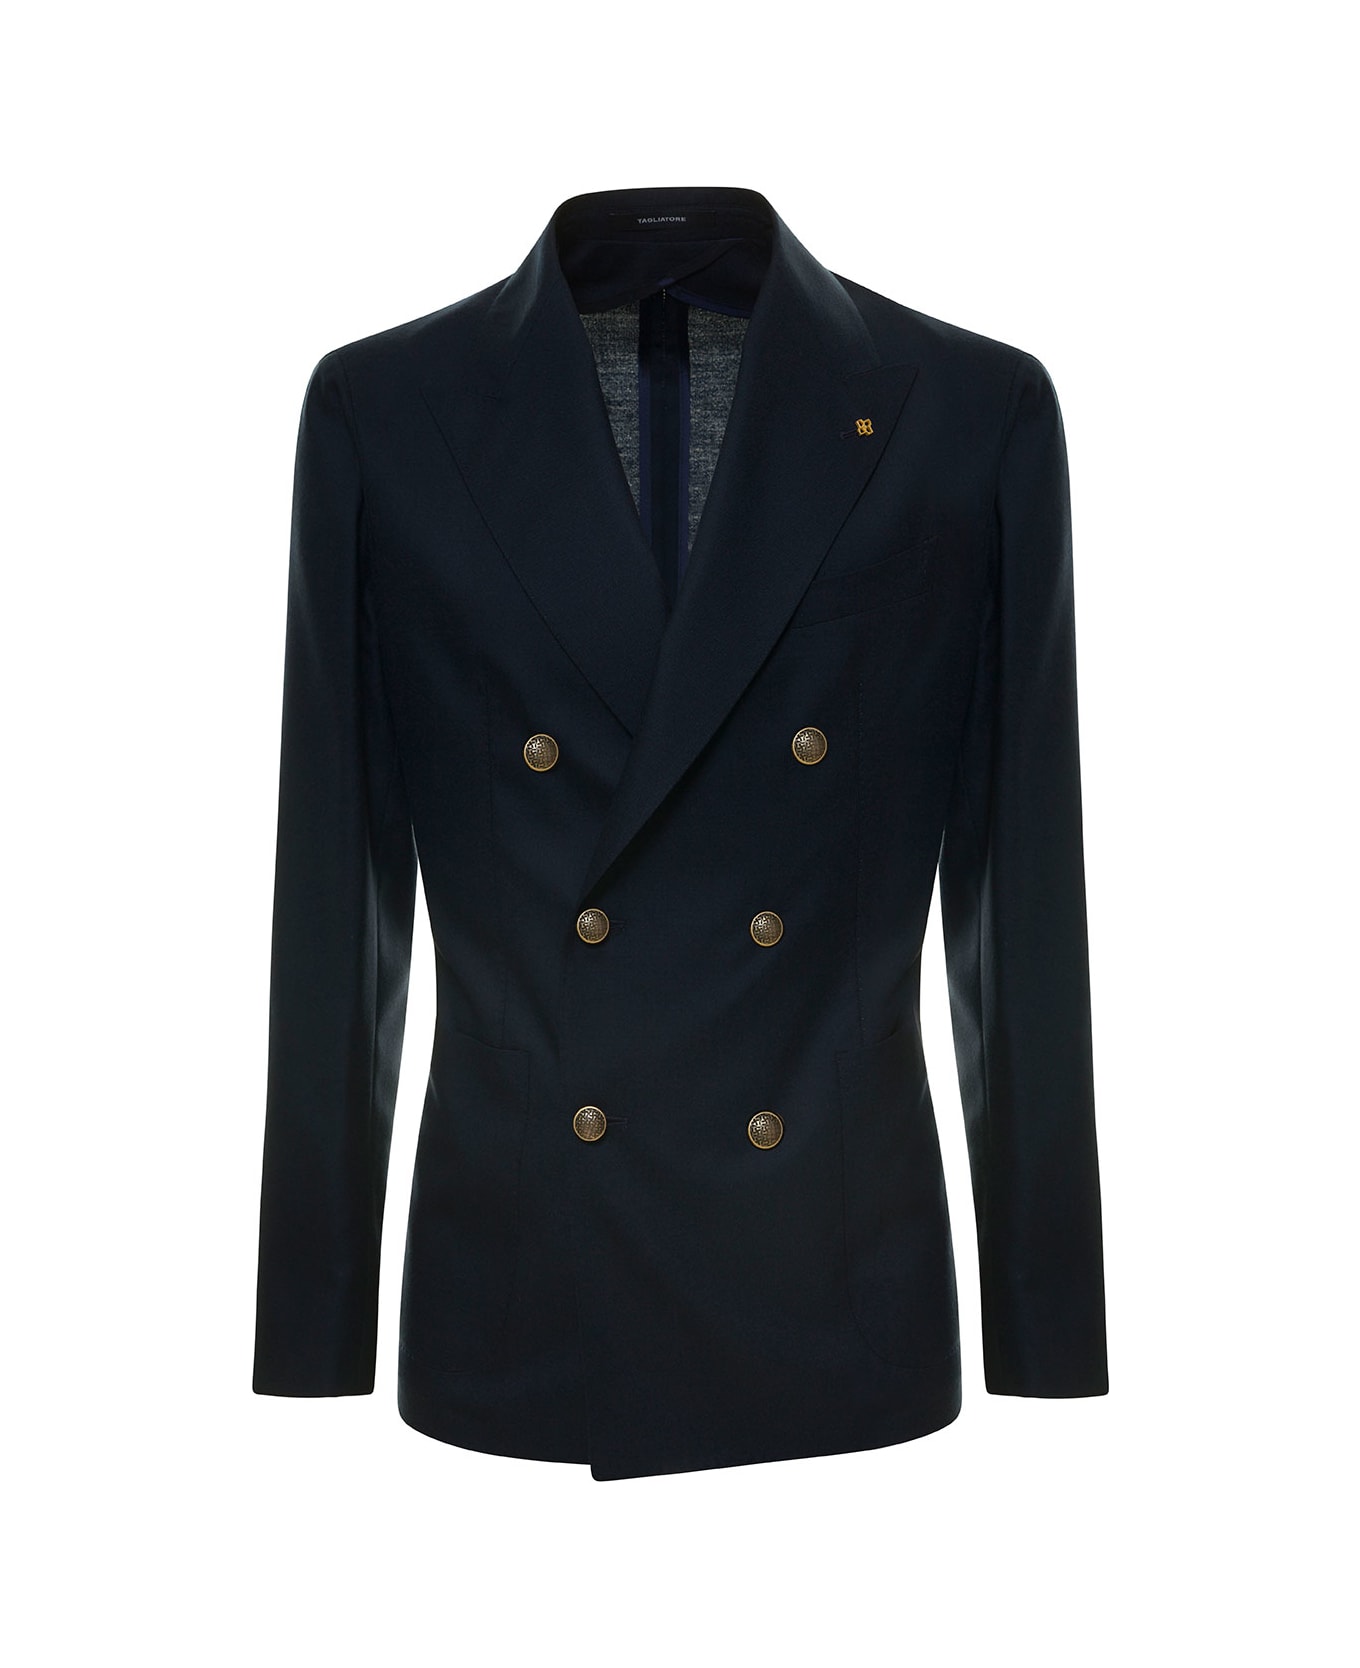 Tagliatore Blue Double-breasted Jacket With Golden Buttons Man - Blu ブレザー